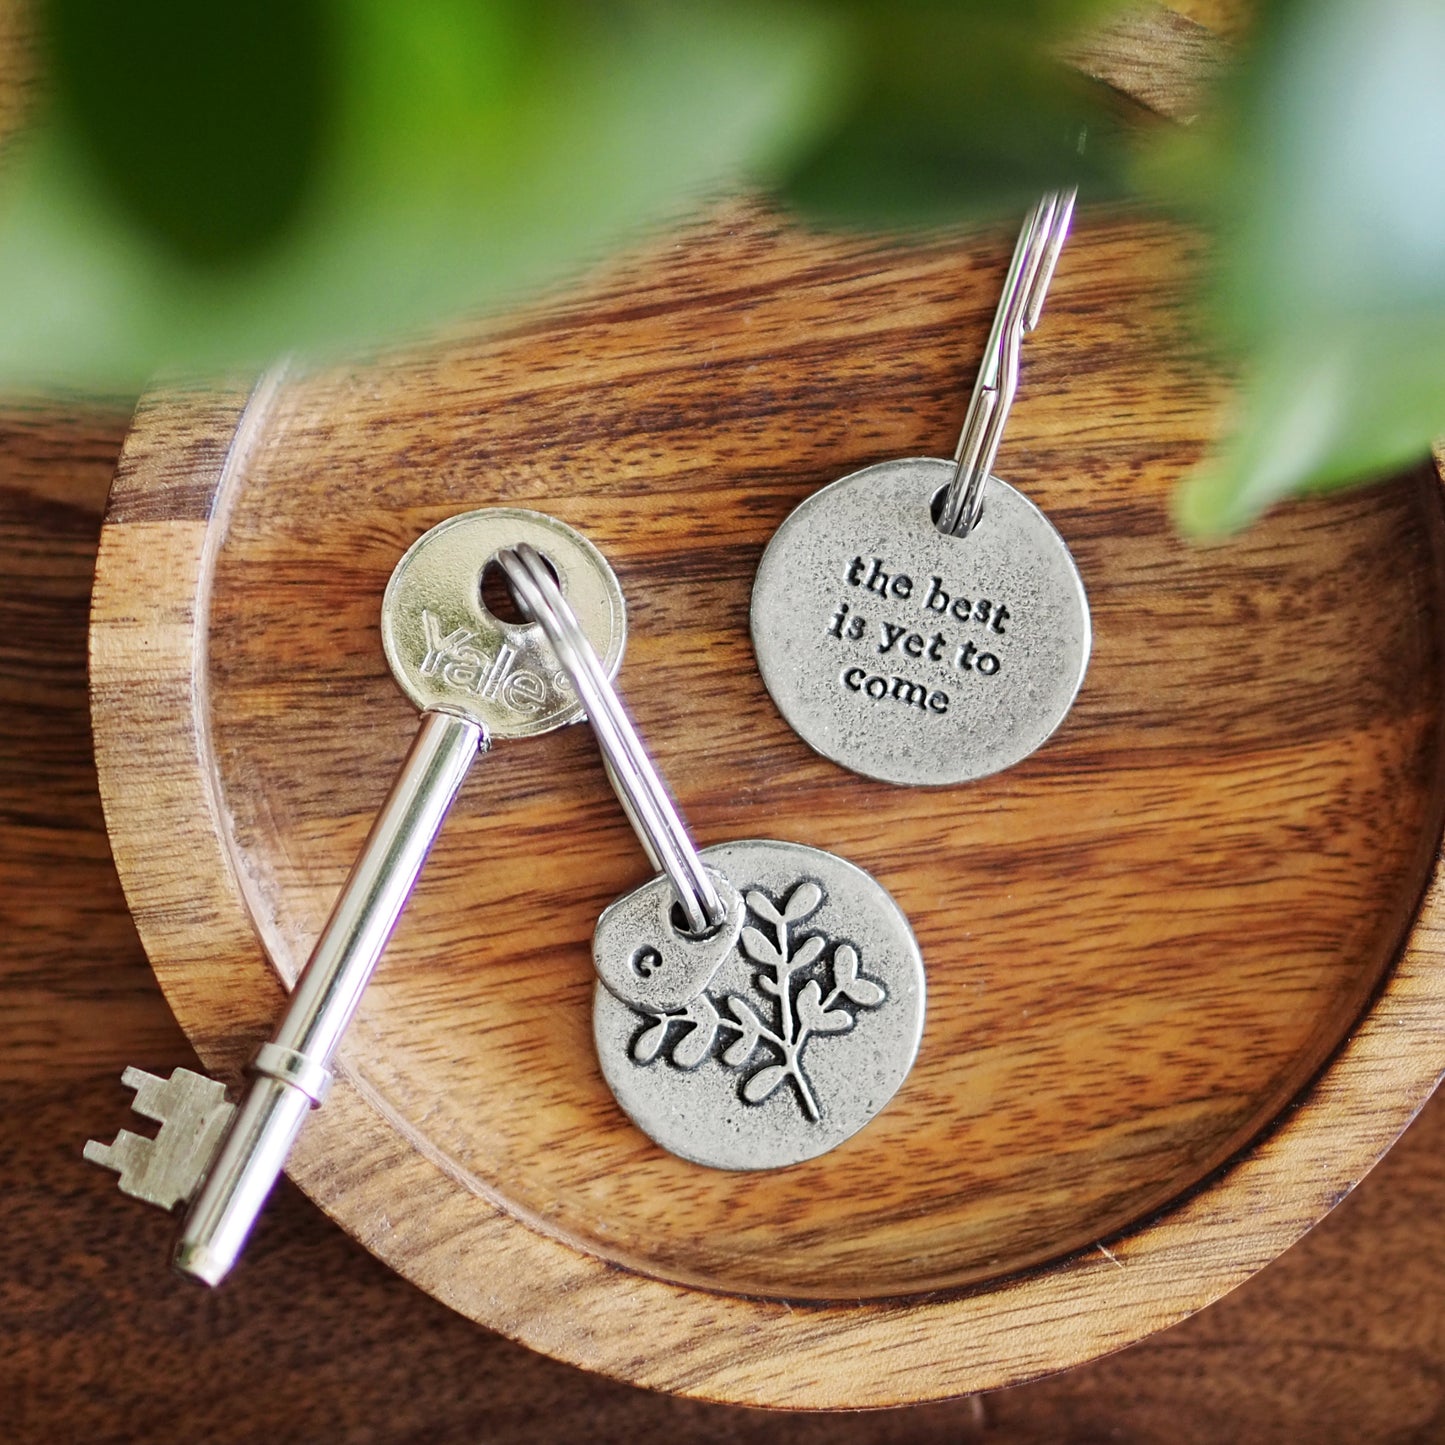 'The Best is Yet to Come' Keyring